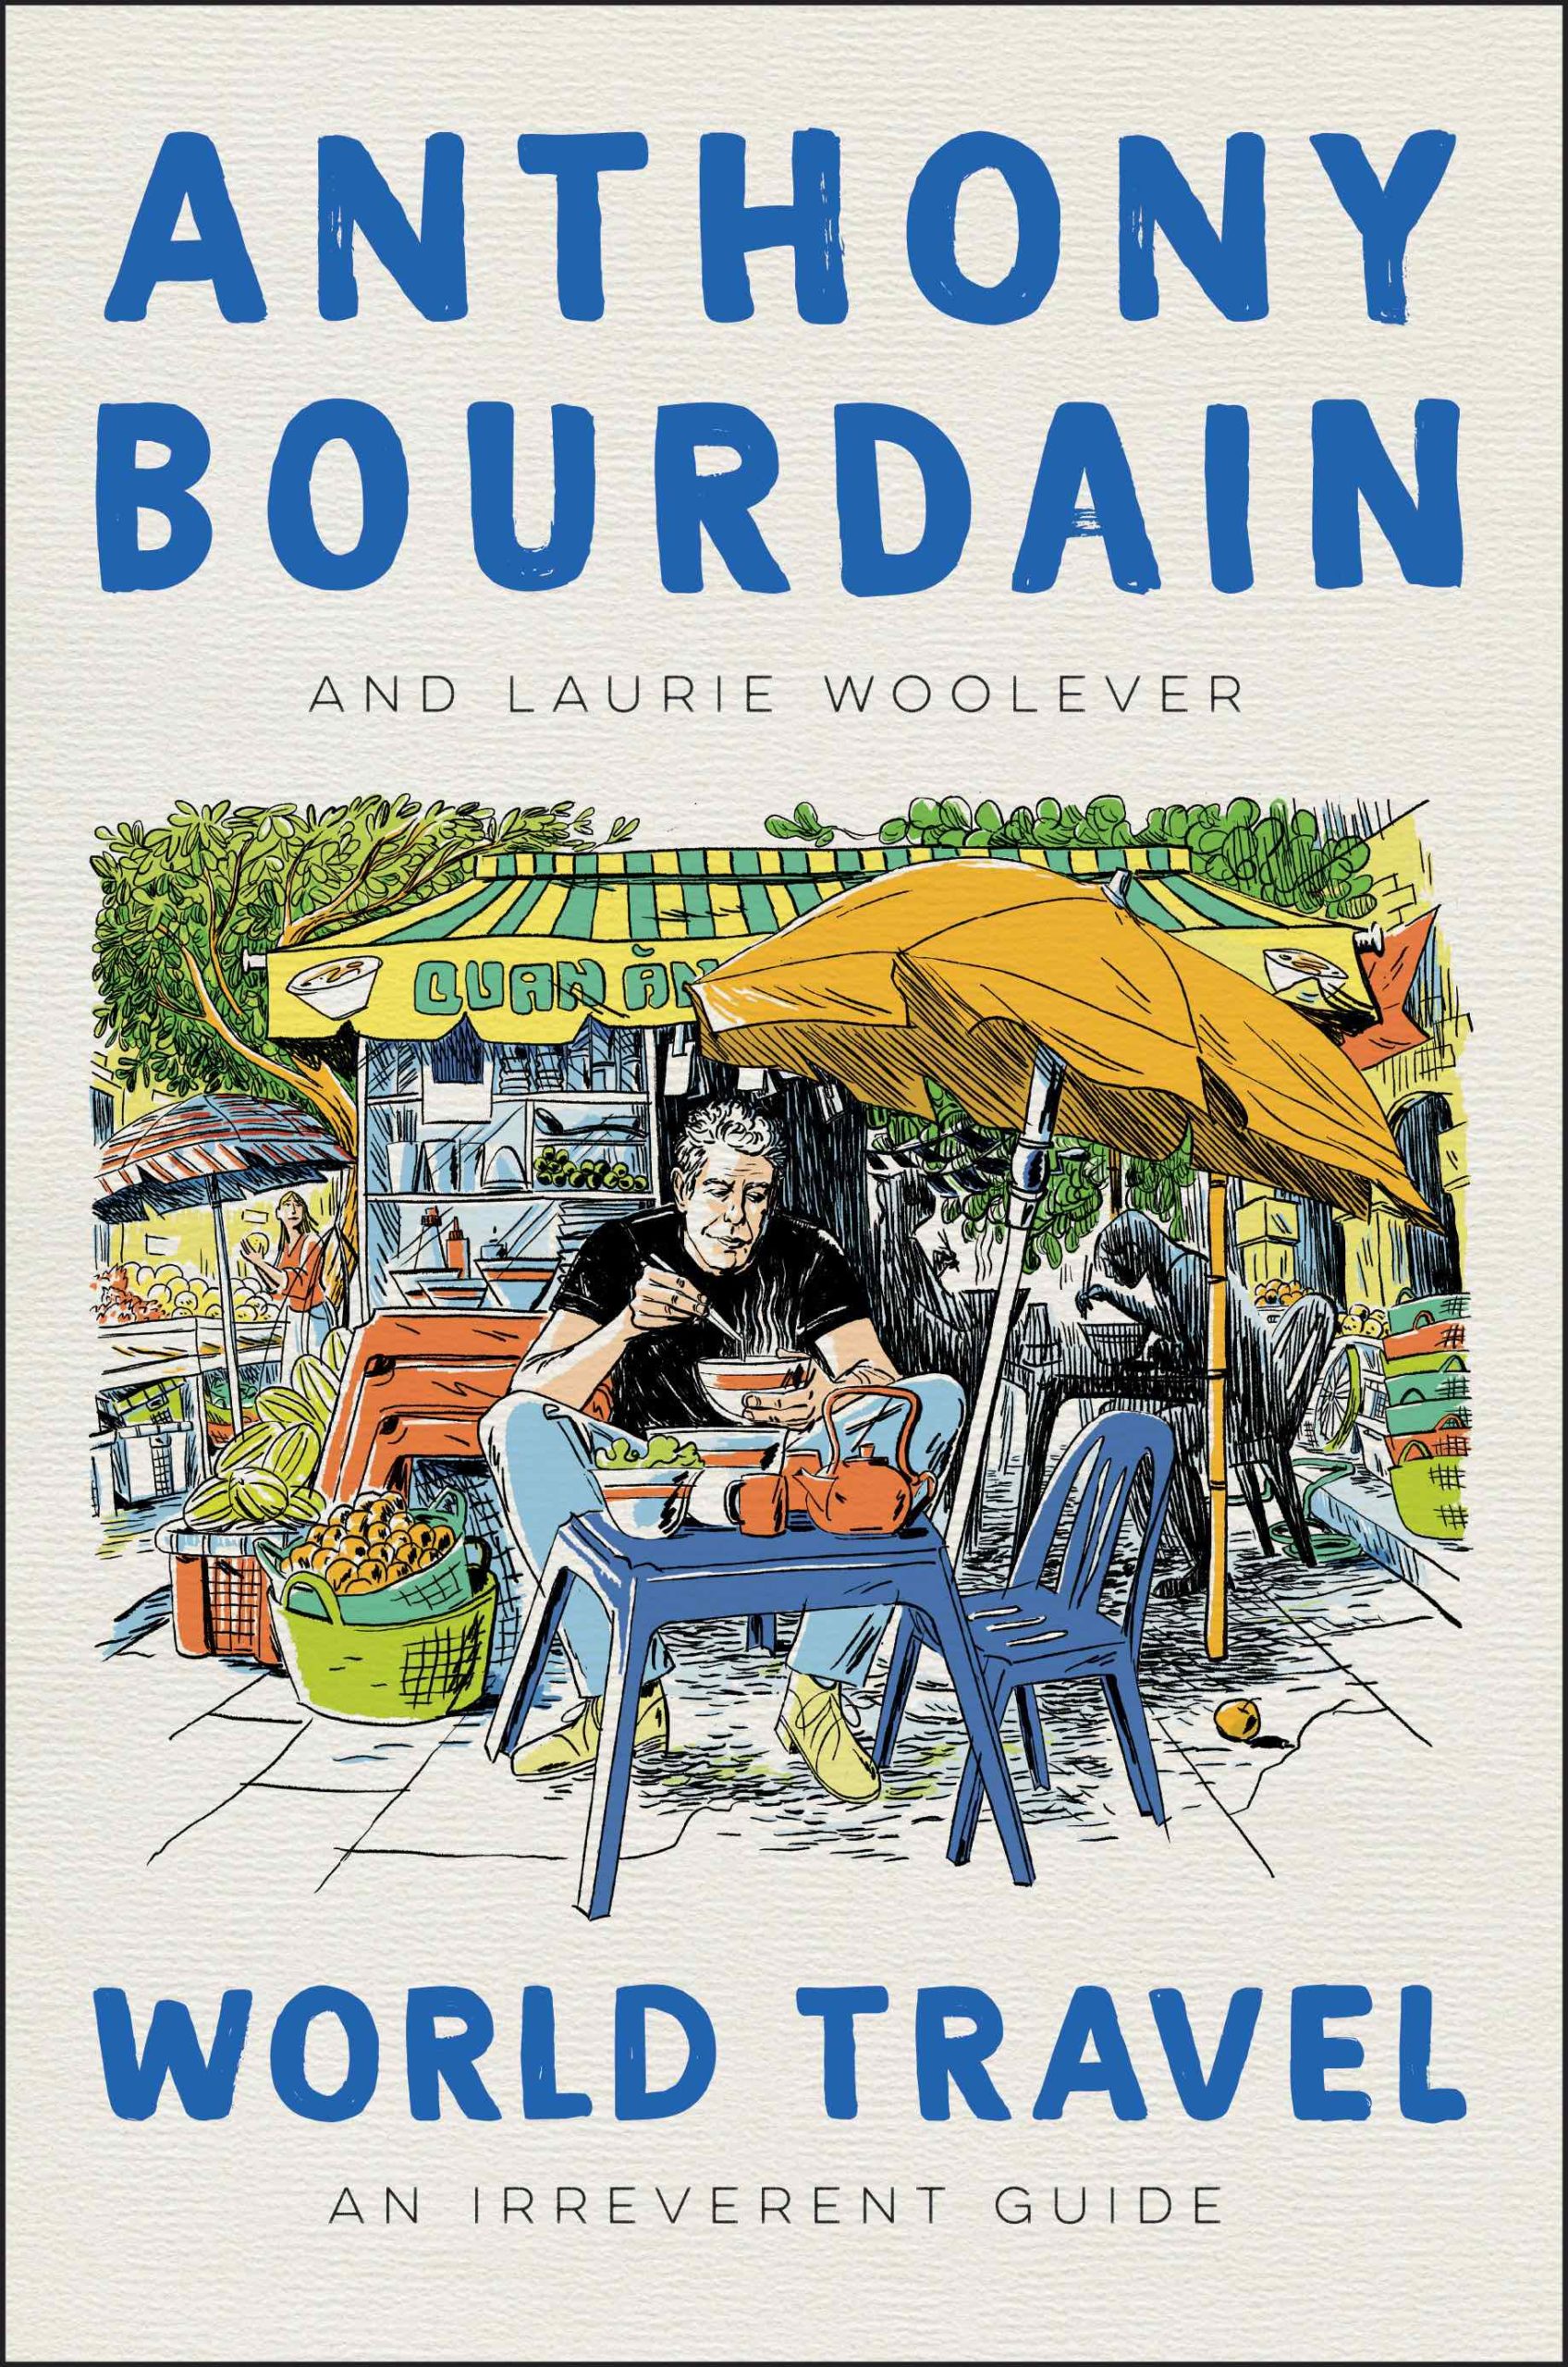 World Travel: An Irreverent Guide<br />
By Anthony Bourdain and Laurie Woolever<br />
